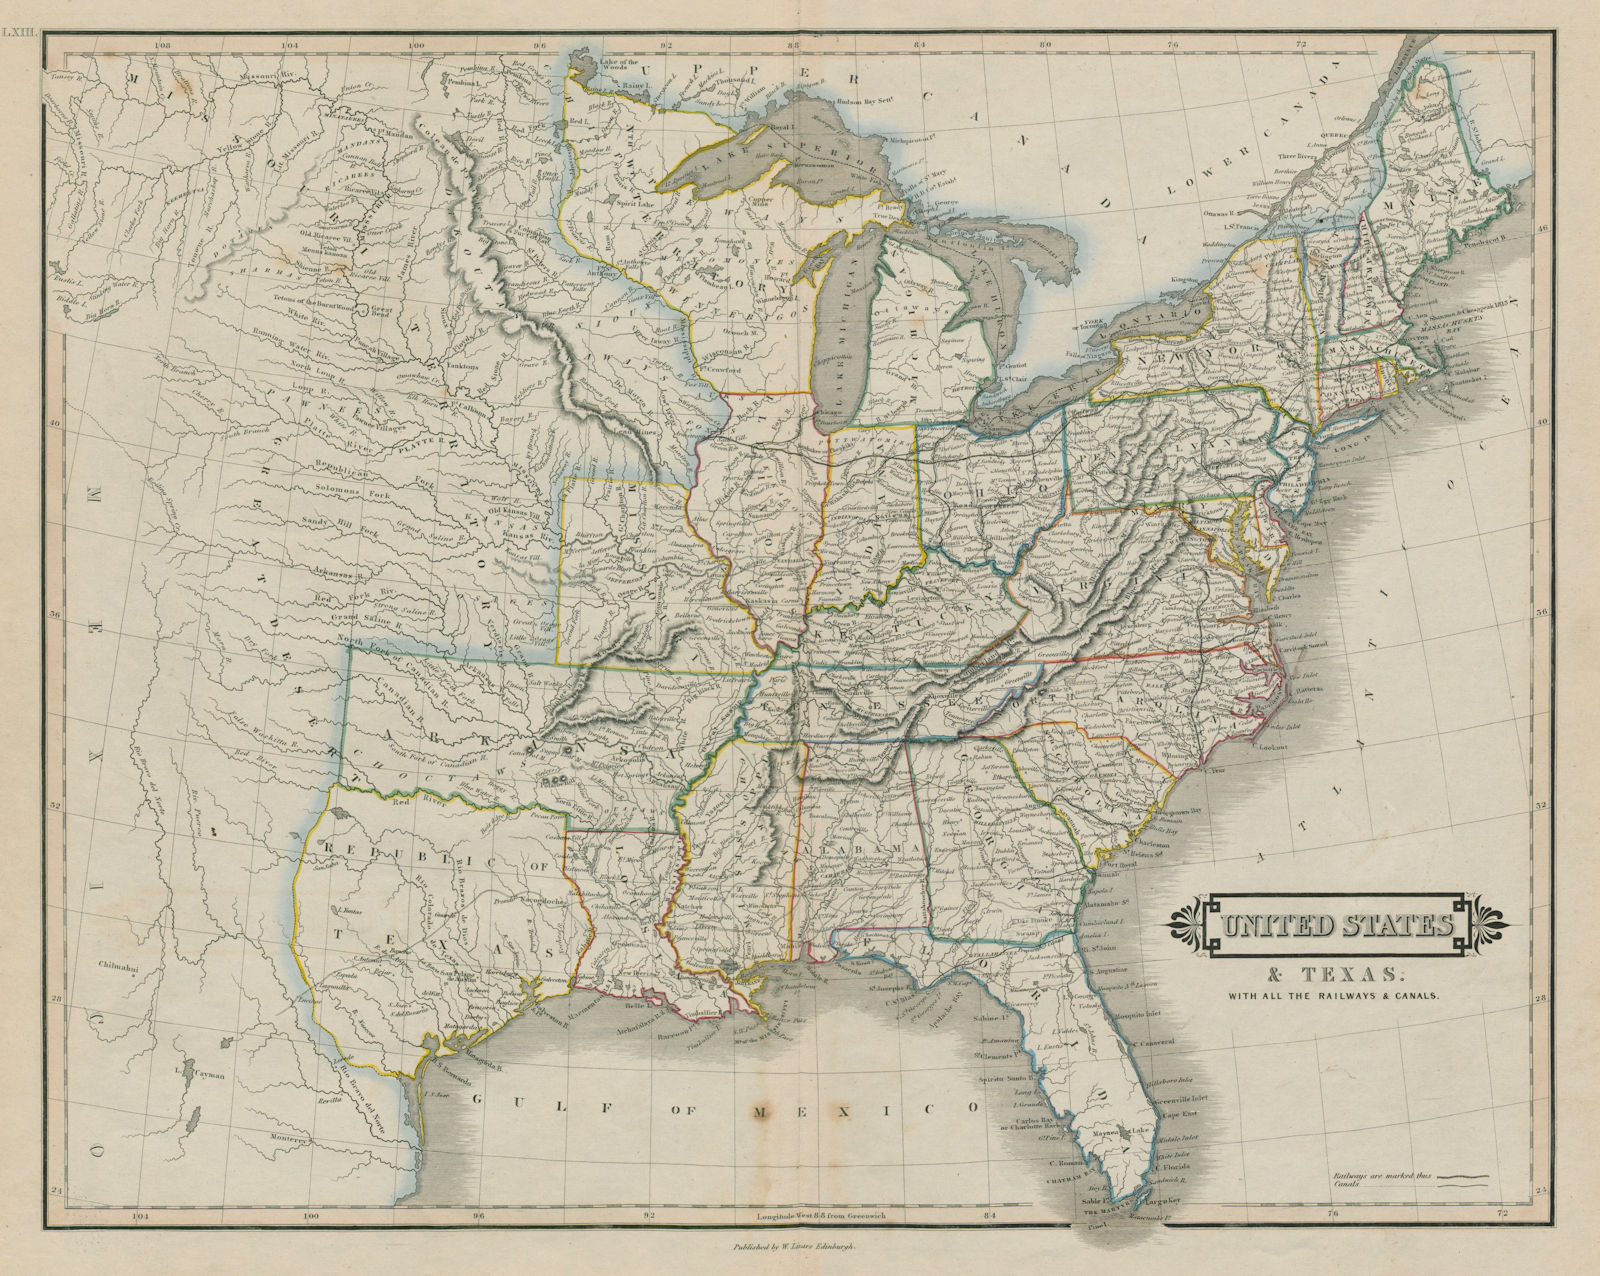 United States & the Republic of Texas, with railways & canals. LIZARS 1842 map